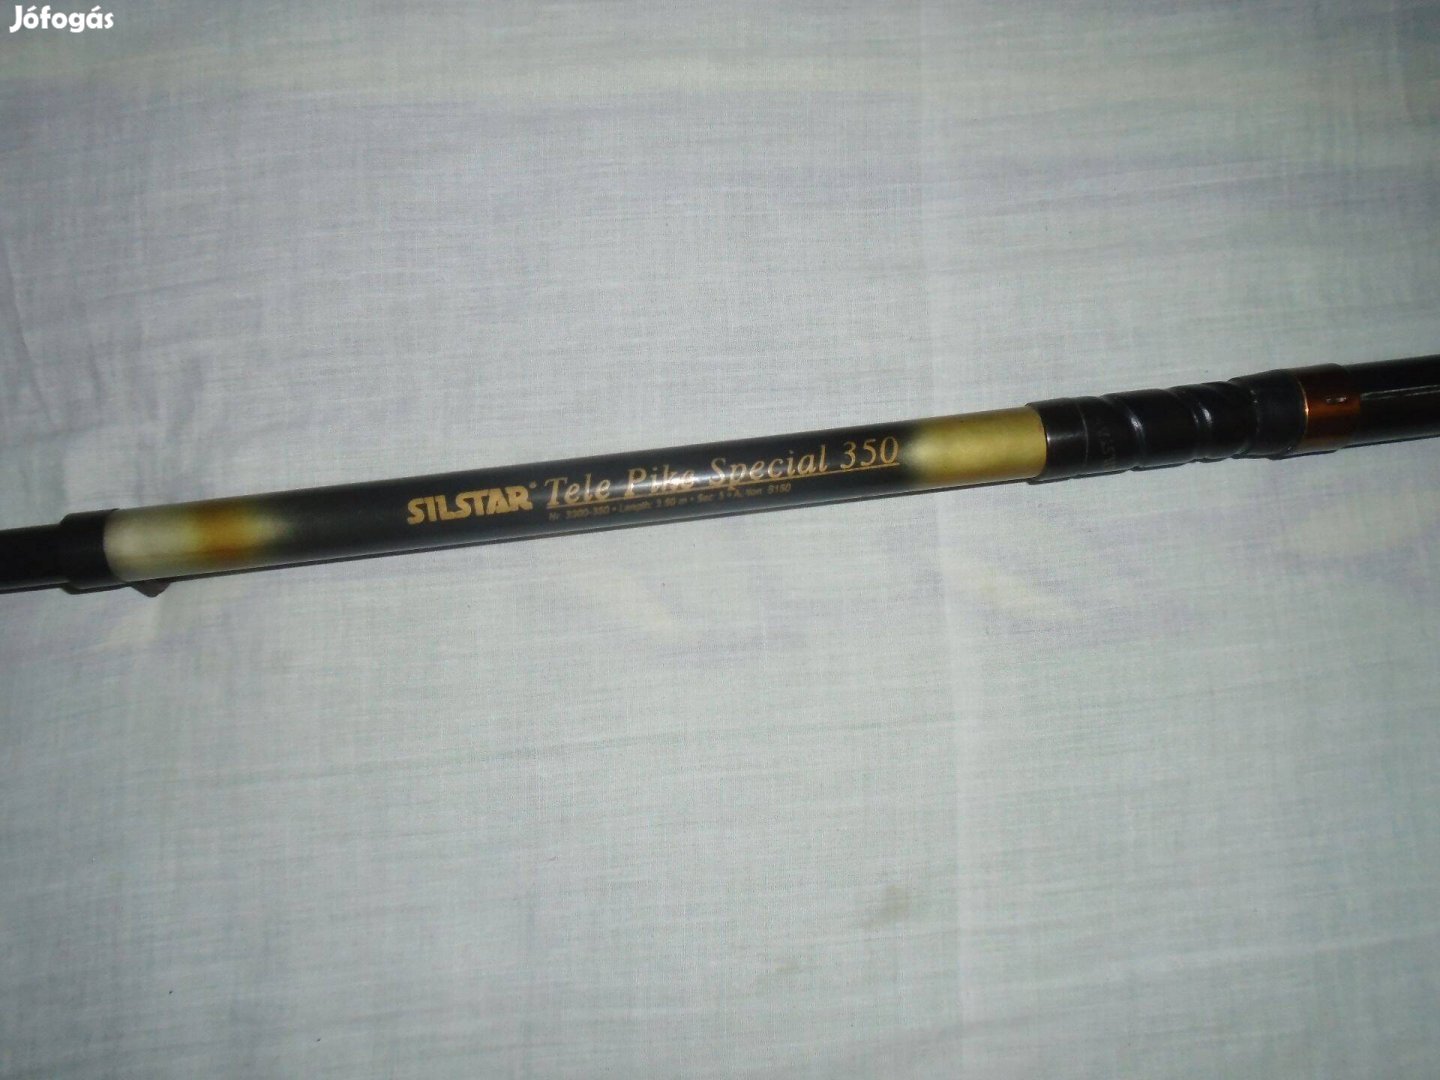 Silstar Tele Pike Special 350